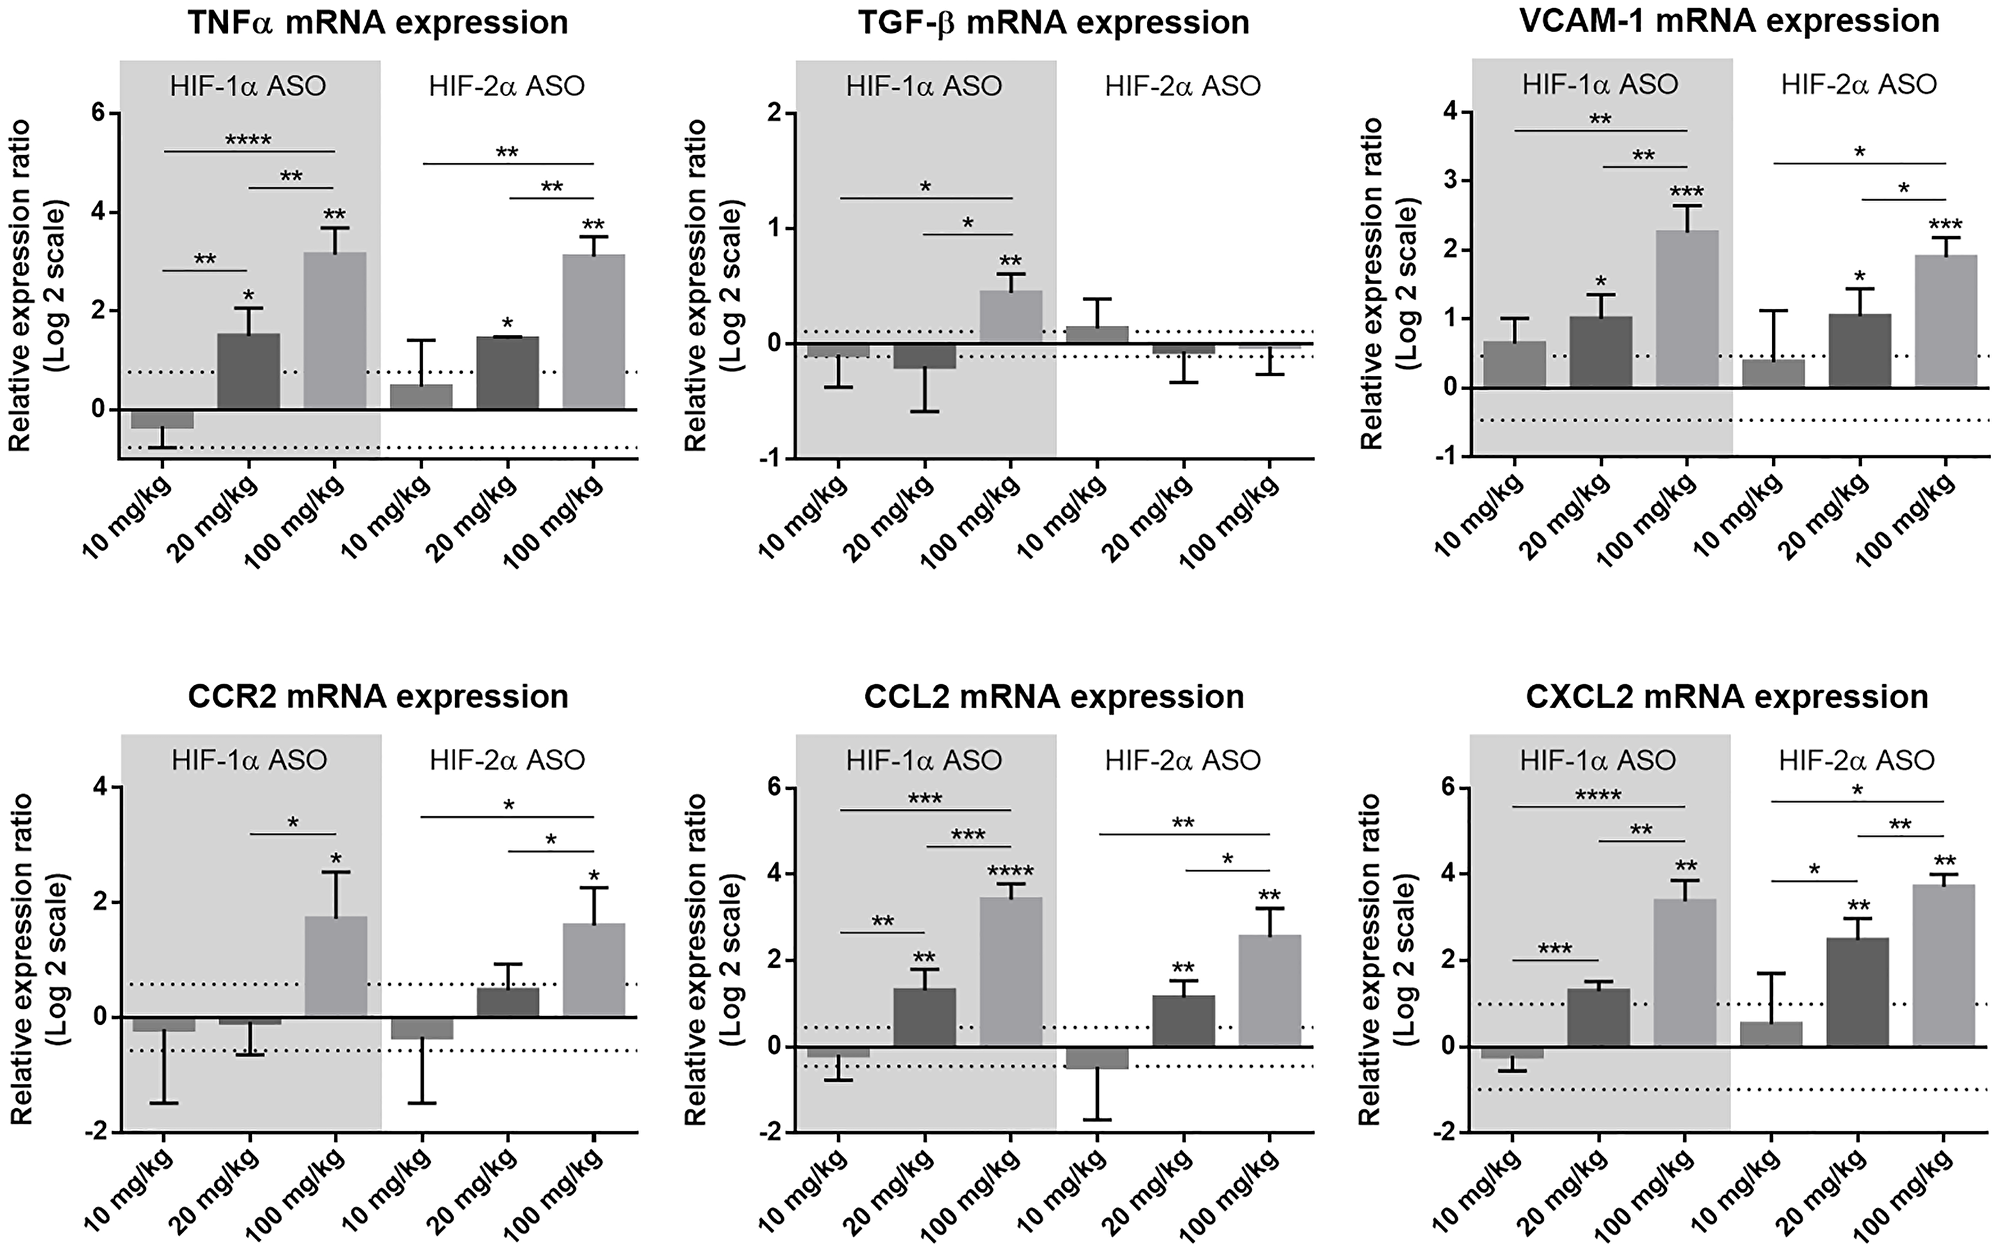 Effect of different dosage regimens of HIF-1α and HIF-2α ASO on hepatic expression of inflammatory markers.